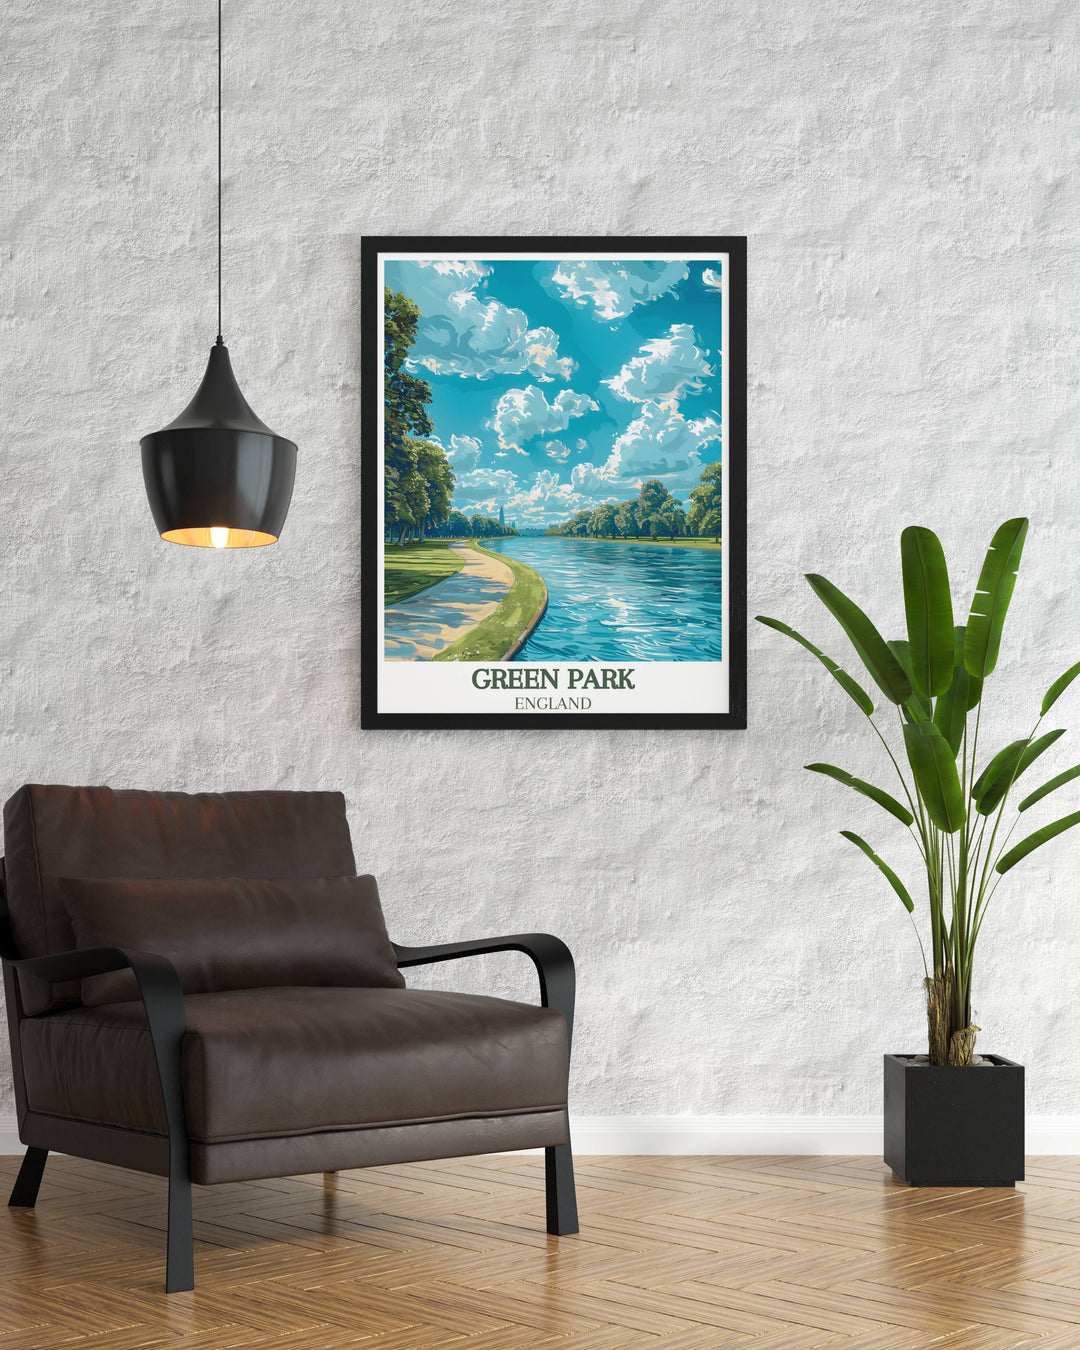 Exquisite framed print of the Princess of Wales Memorial Walk and Green Park London, highlighting the scenic pathway and lush landscapes, perfect for those who appreciate the beauty of Londons Royal Parks.